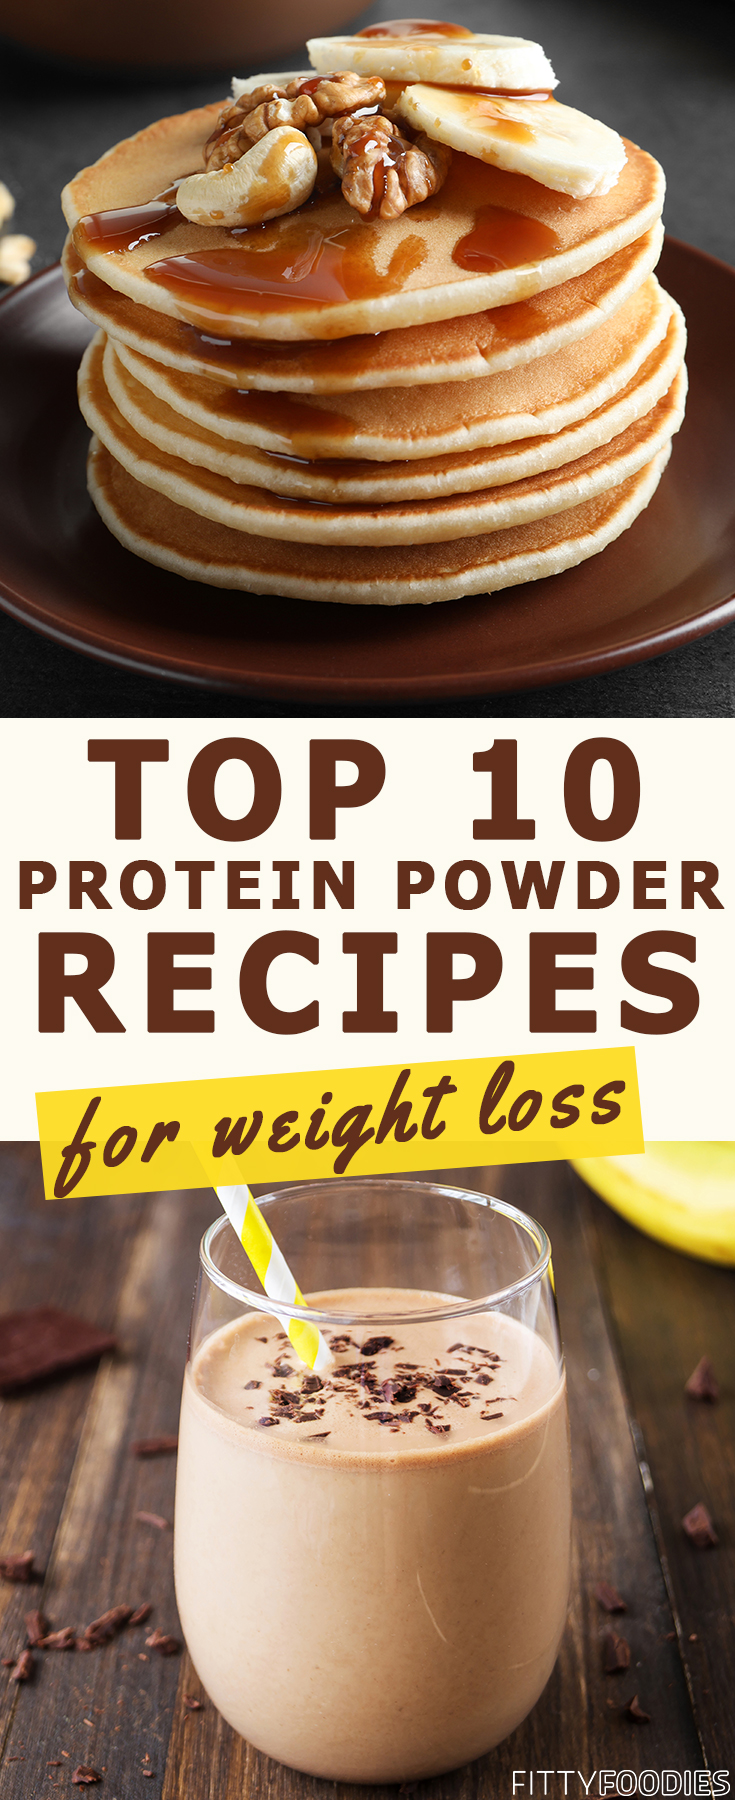 Top 10 Weight Loss Recipes With Protein Powder - FittyFoodies